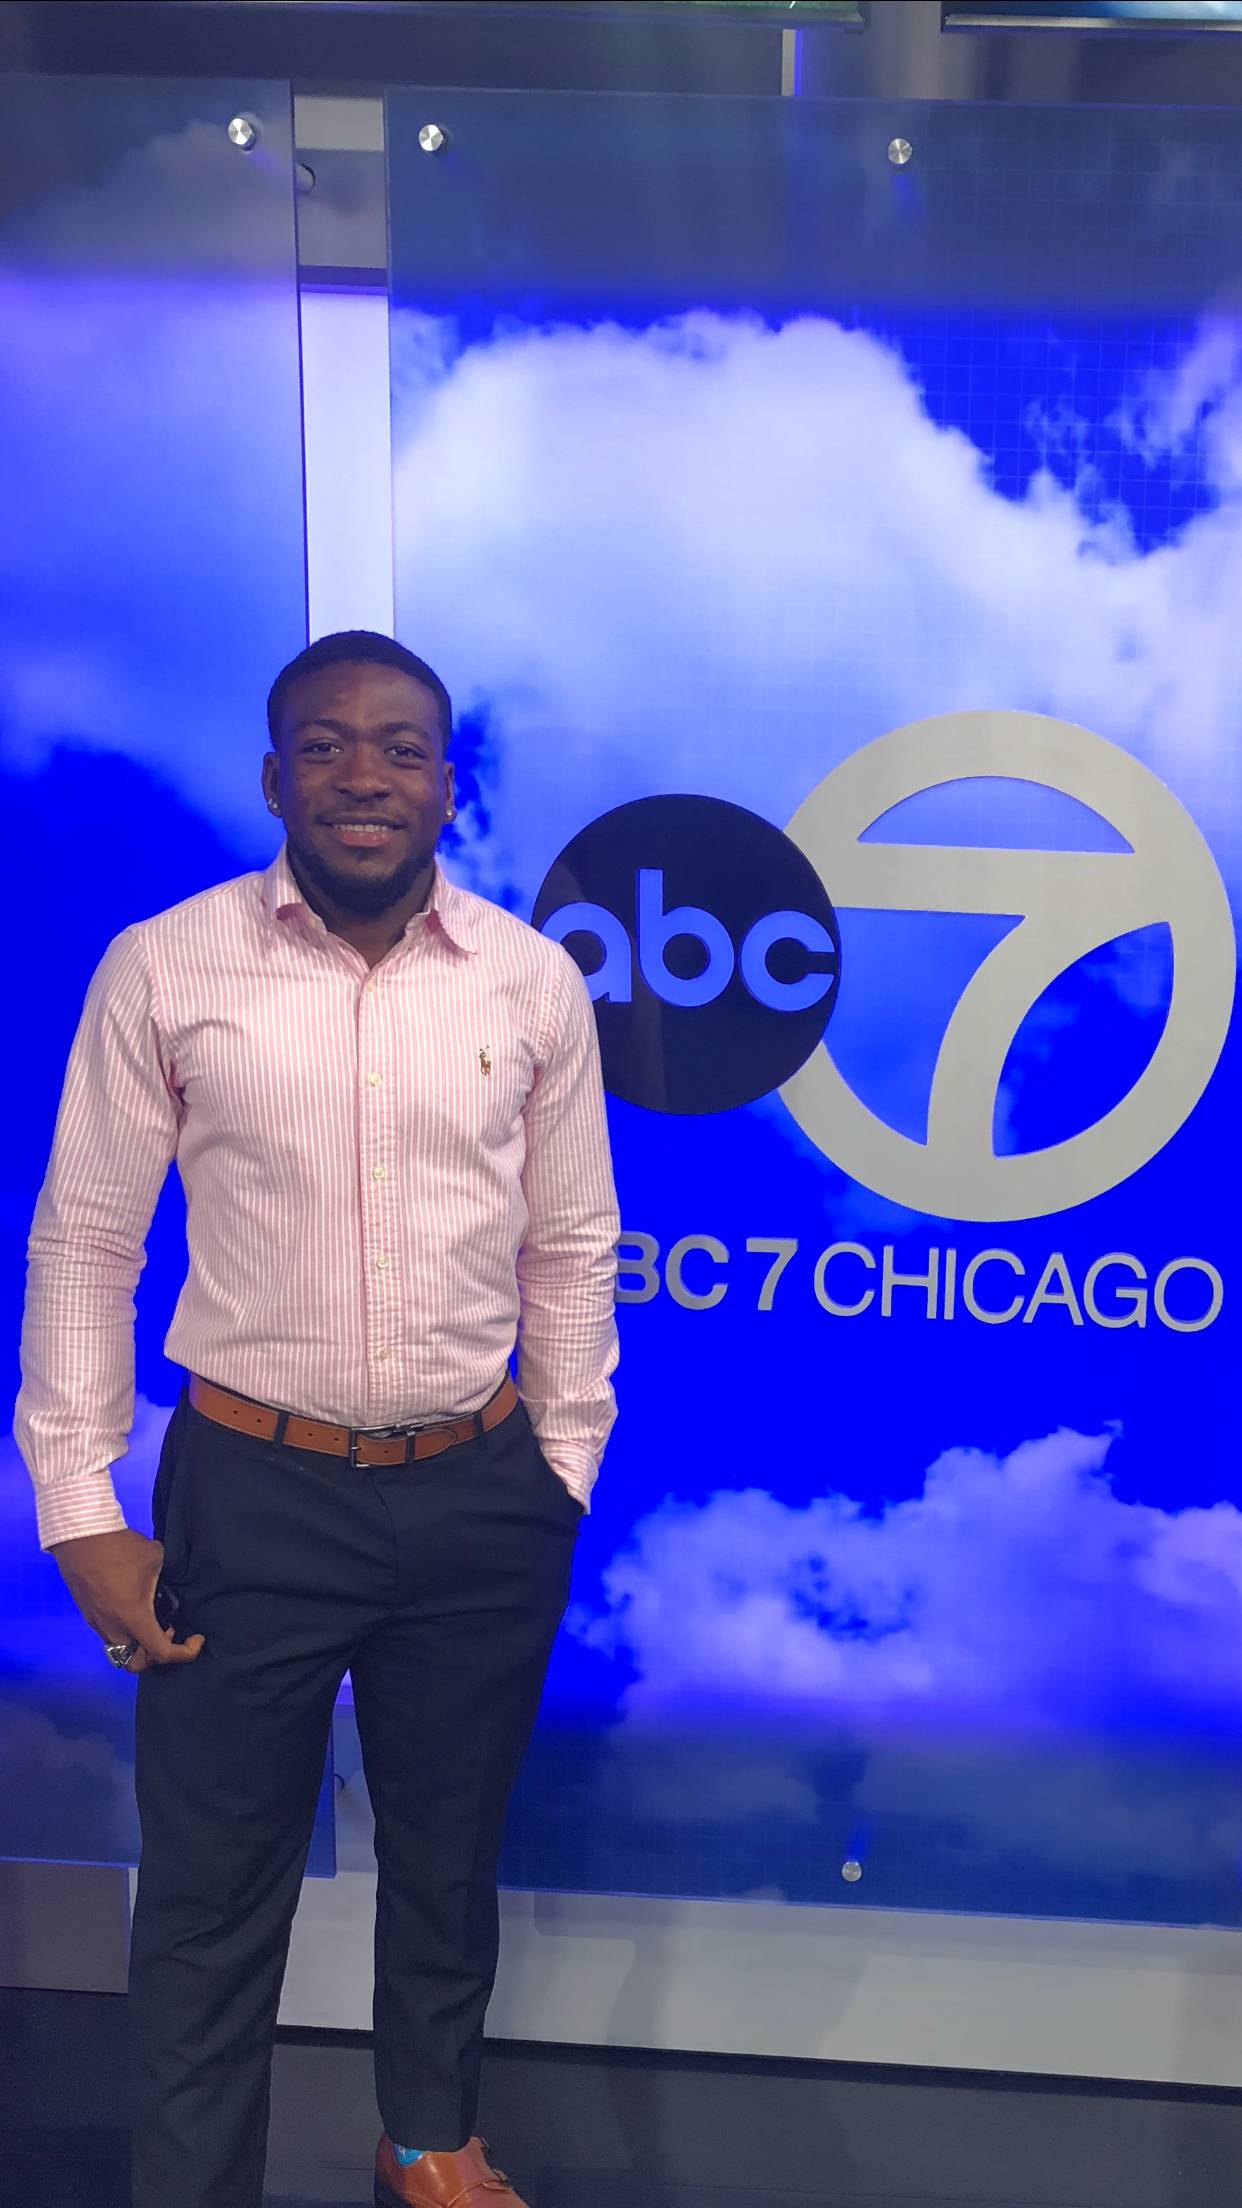 picture of a Black male standing, smiling in front of an ABC 7 Chicago logo wearing a salmon colored button down shirt and blue dress pants.